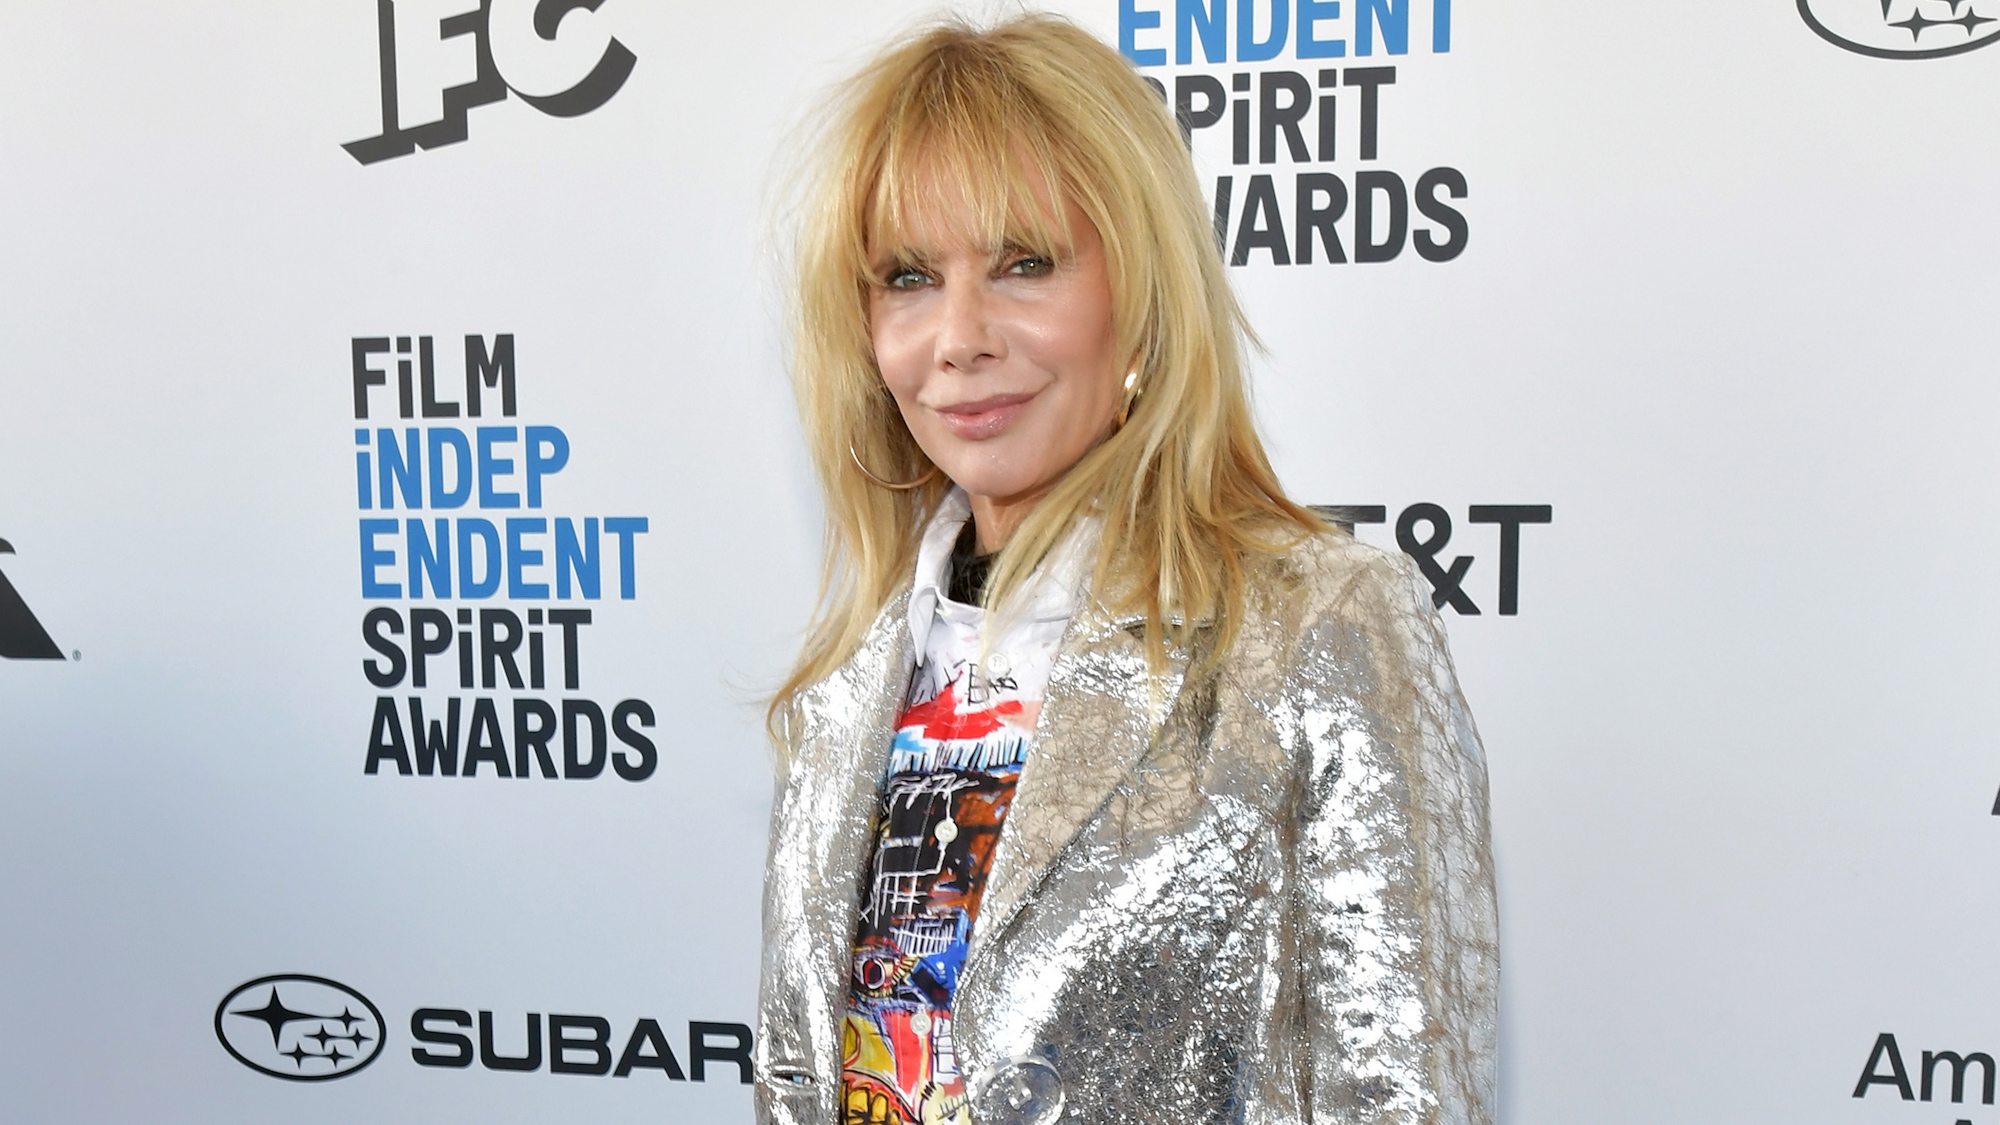 24+ Amazing Photos of Rosanna Arquette - Swanty Gallery